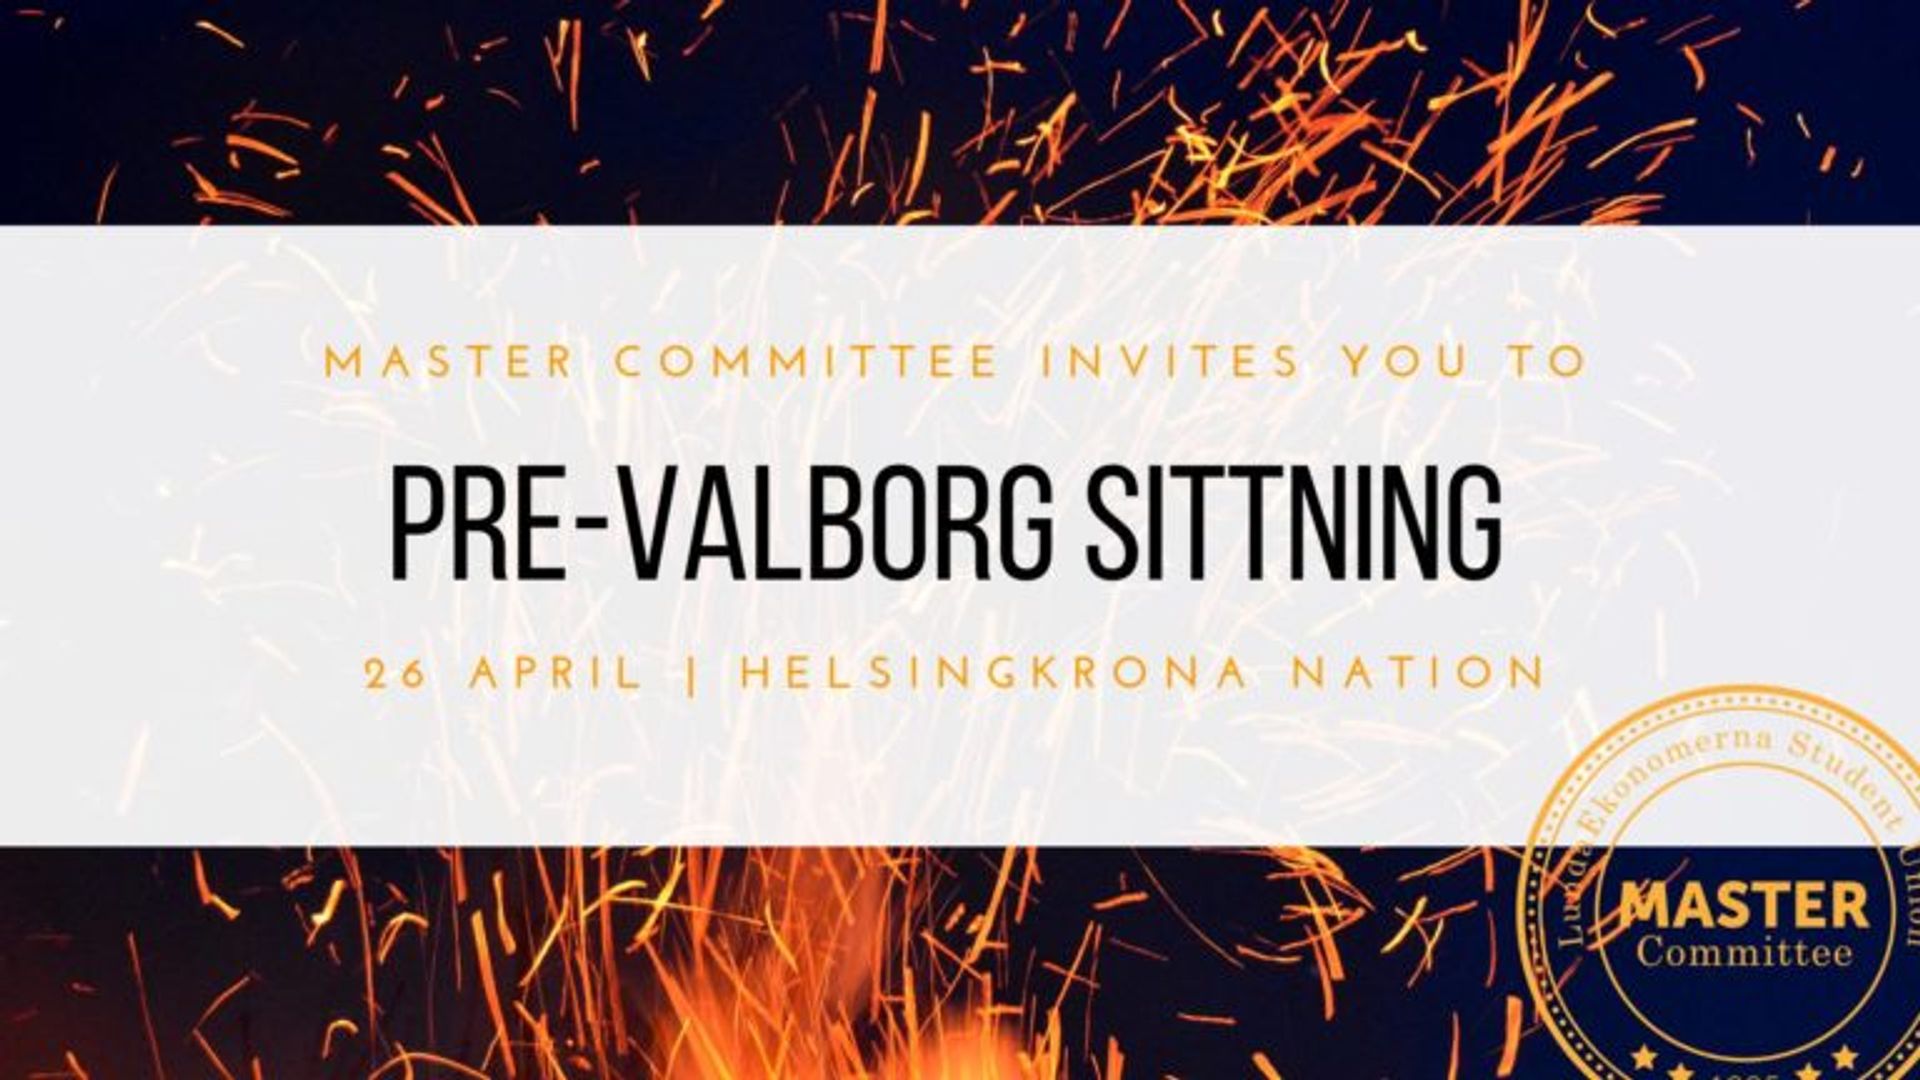 Invitation to a dinner, text reads 'Master committee invites you to Pre-Valborg Sittning'.